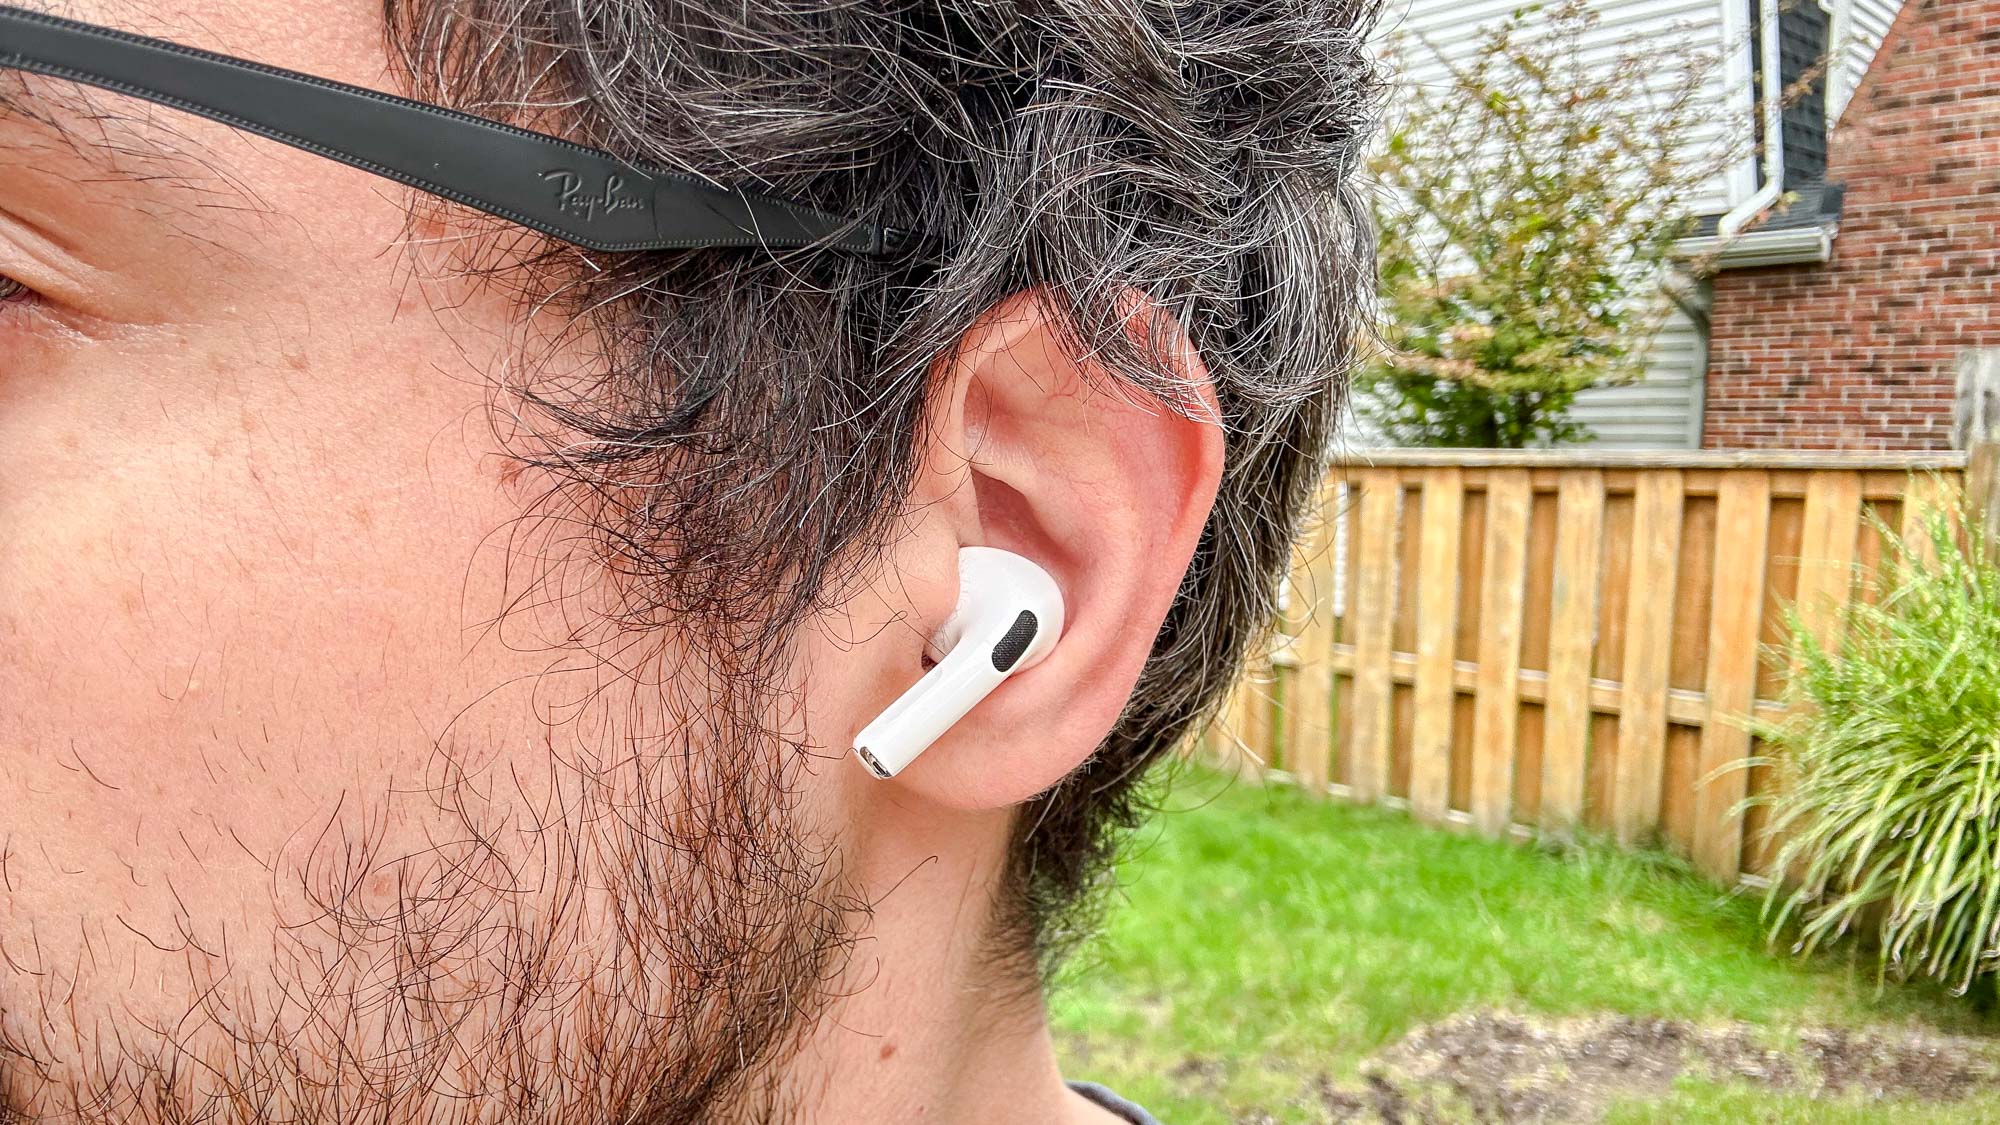 Apple AirPods Pro (2nd Generation) with single bud in ear